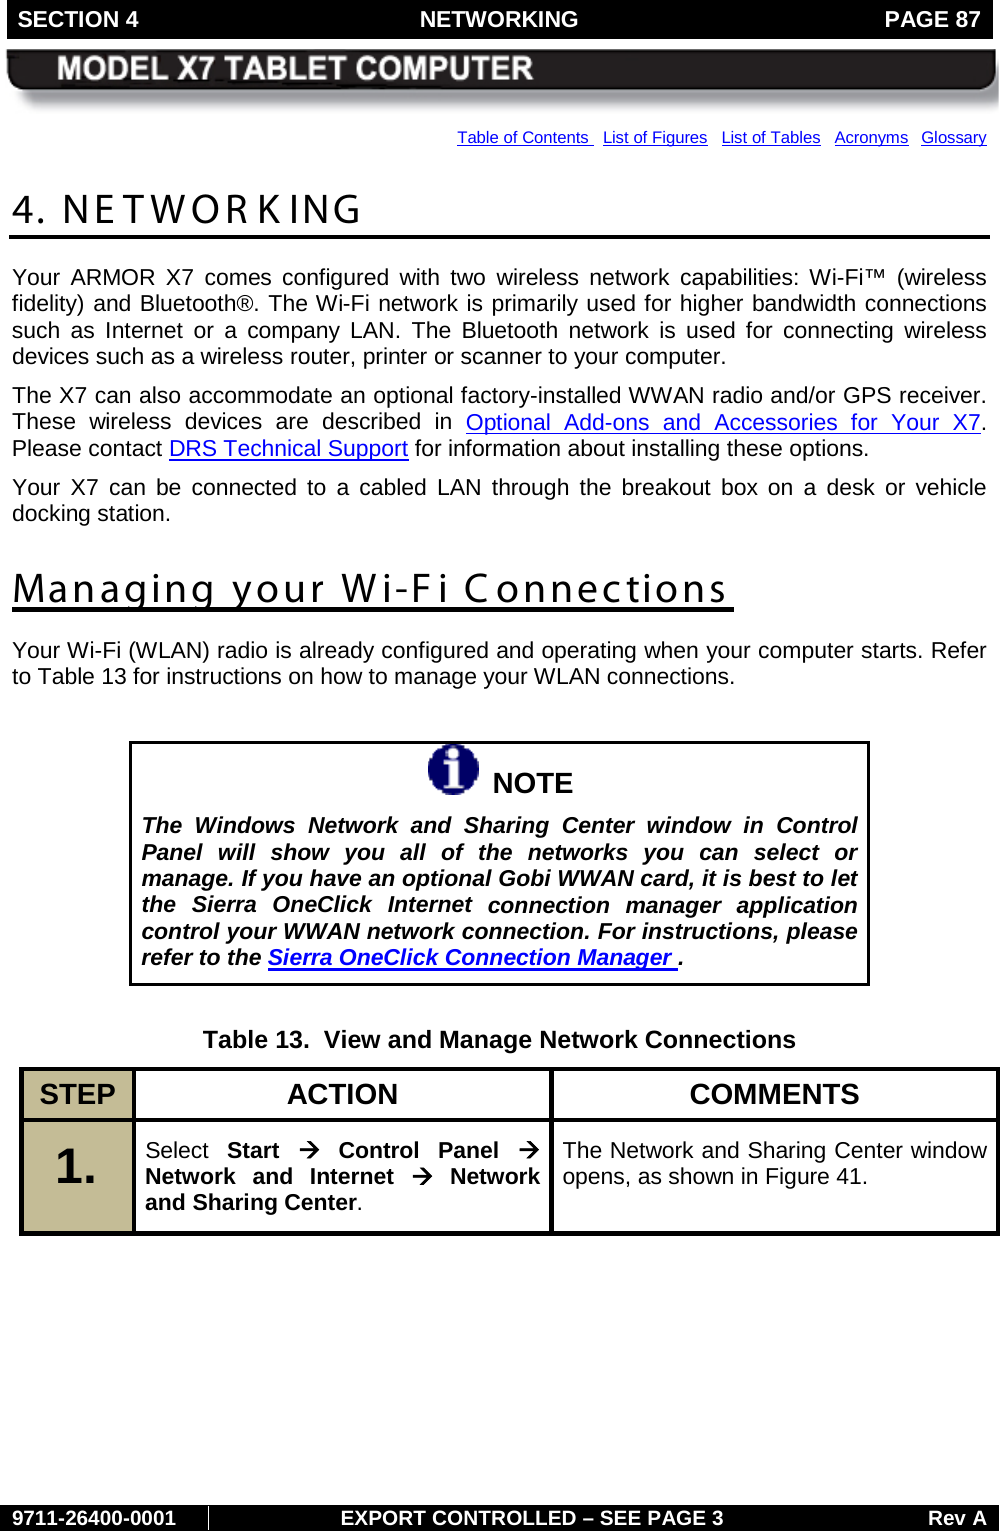 SECTION 4 NETWORKING  PAGE 87        9711-26400-0001 EXPORT CONTROLLED – SEE PAGE 3 Rev A Table of Contents   List of Figures   List of Tables   Acronyms  Glossary 4. NE TWOR K ING Your ARMOR X7 comes configured with two wireless network capabilities: Wi-Fi™ (wireless fidelity) and Bluetooth®. The Wi-Fi network is primarily used for higher bandwidth connections such as Internet or a company LAN. The Bluetooth network is used for connecting wireless devices such as a wireless router, printer or scanner to your computer. The X7 can also accommodate an optional factory-installed WWAN radio and/or GPS receiver. These wireless devices are described in Optional Add-ons and Accessories for Your X7.  Please contact DRS Technical Support for information about installing these options. Your X7 can be connected to a cabled LAN through the breakout box on a desk or vehicle docking station. Managing your Wi-Fi Connections Your Wi-Fi (WLAN) radio is already configured and operating when your computer starts. Refer to Table 13 for instructions on how to manage your WLAN connections.    NOTE The Windows Network and Sharing Center window in Control Panel will show you all of the networks you can select or manage. If you have an optional Gobi WWAN card, it is best to let the Sierra OneClick Internet connection manager application control your WWAN network connection. For instructions, please refer to the Sierra OneClick Connection Manager .  Table 13.  View and Manage Network Connections STEP  ACTION COMMENTS 1.   Select Start à Control Panel à Network and Internet à Network and Sharing Center.  The Network and Sharing Center window opens, as shown in Figure 41.  